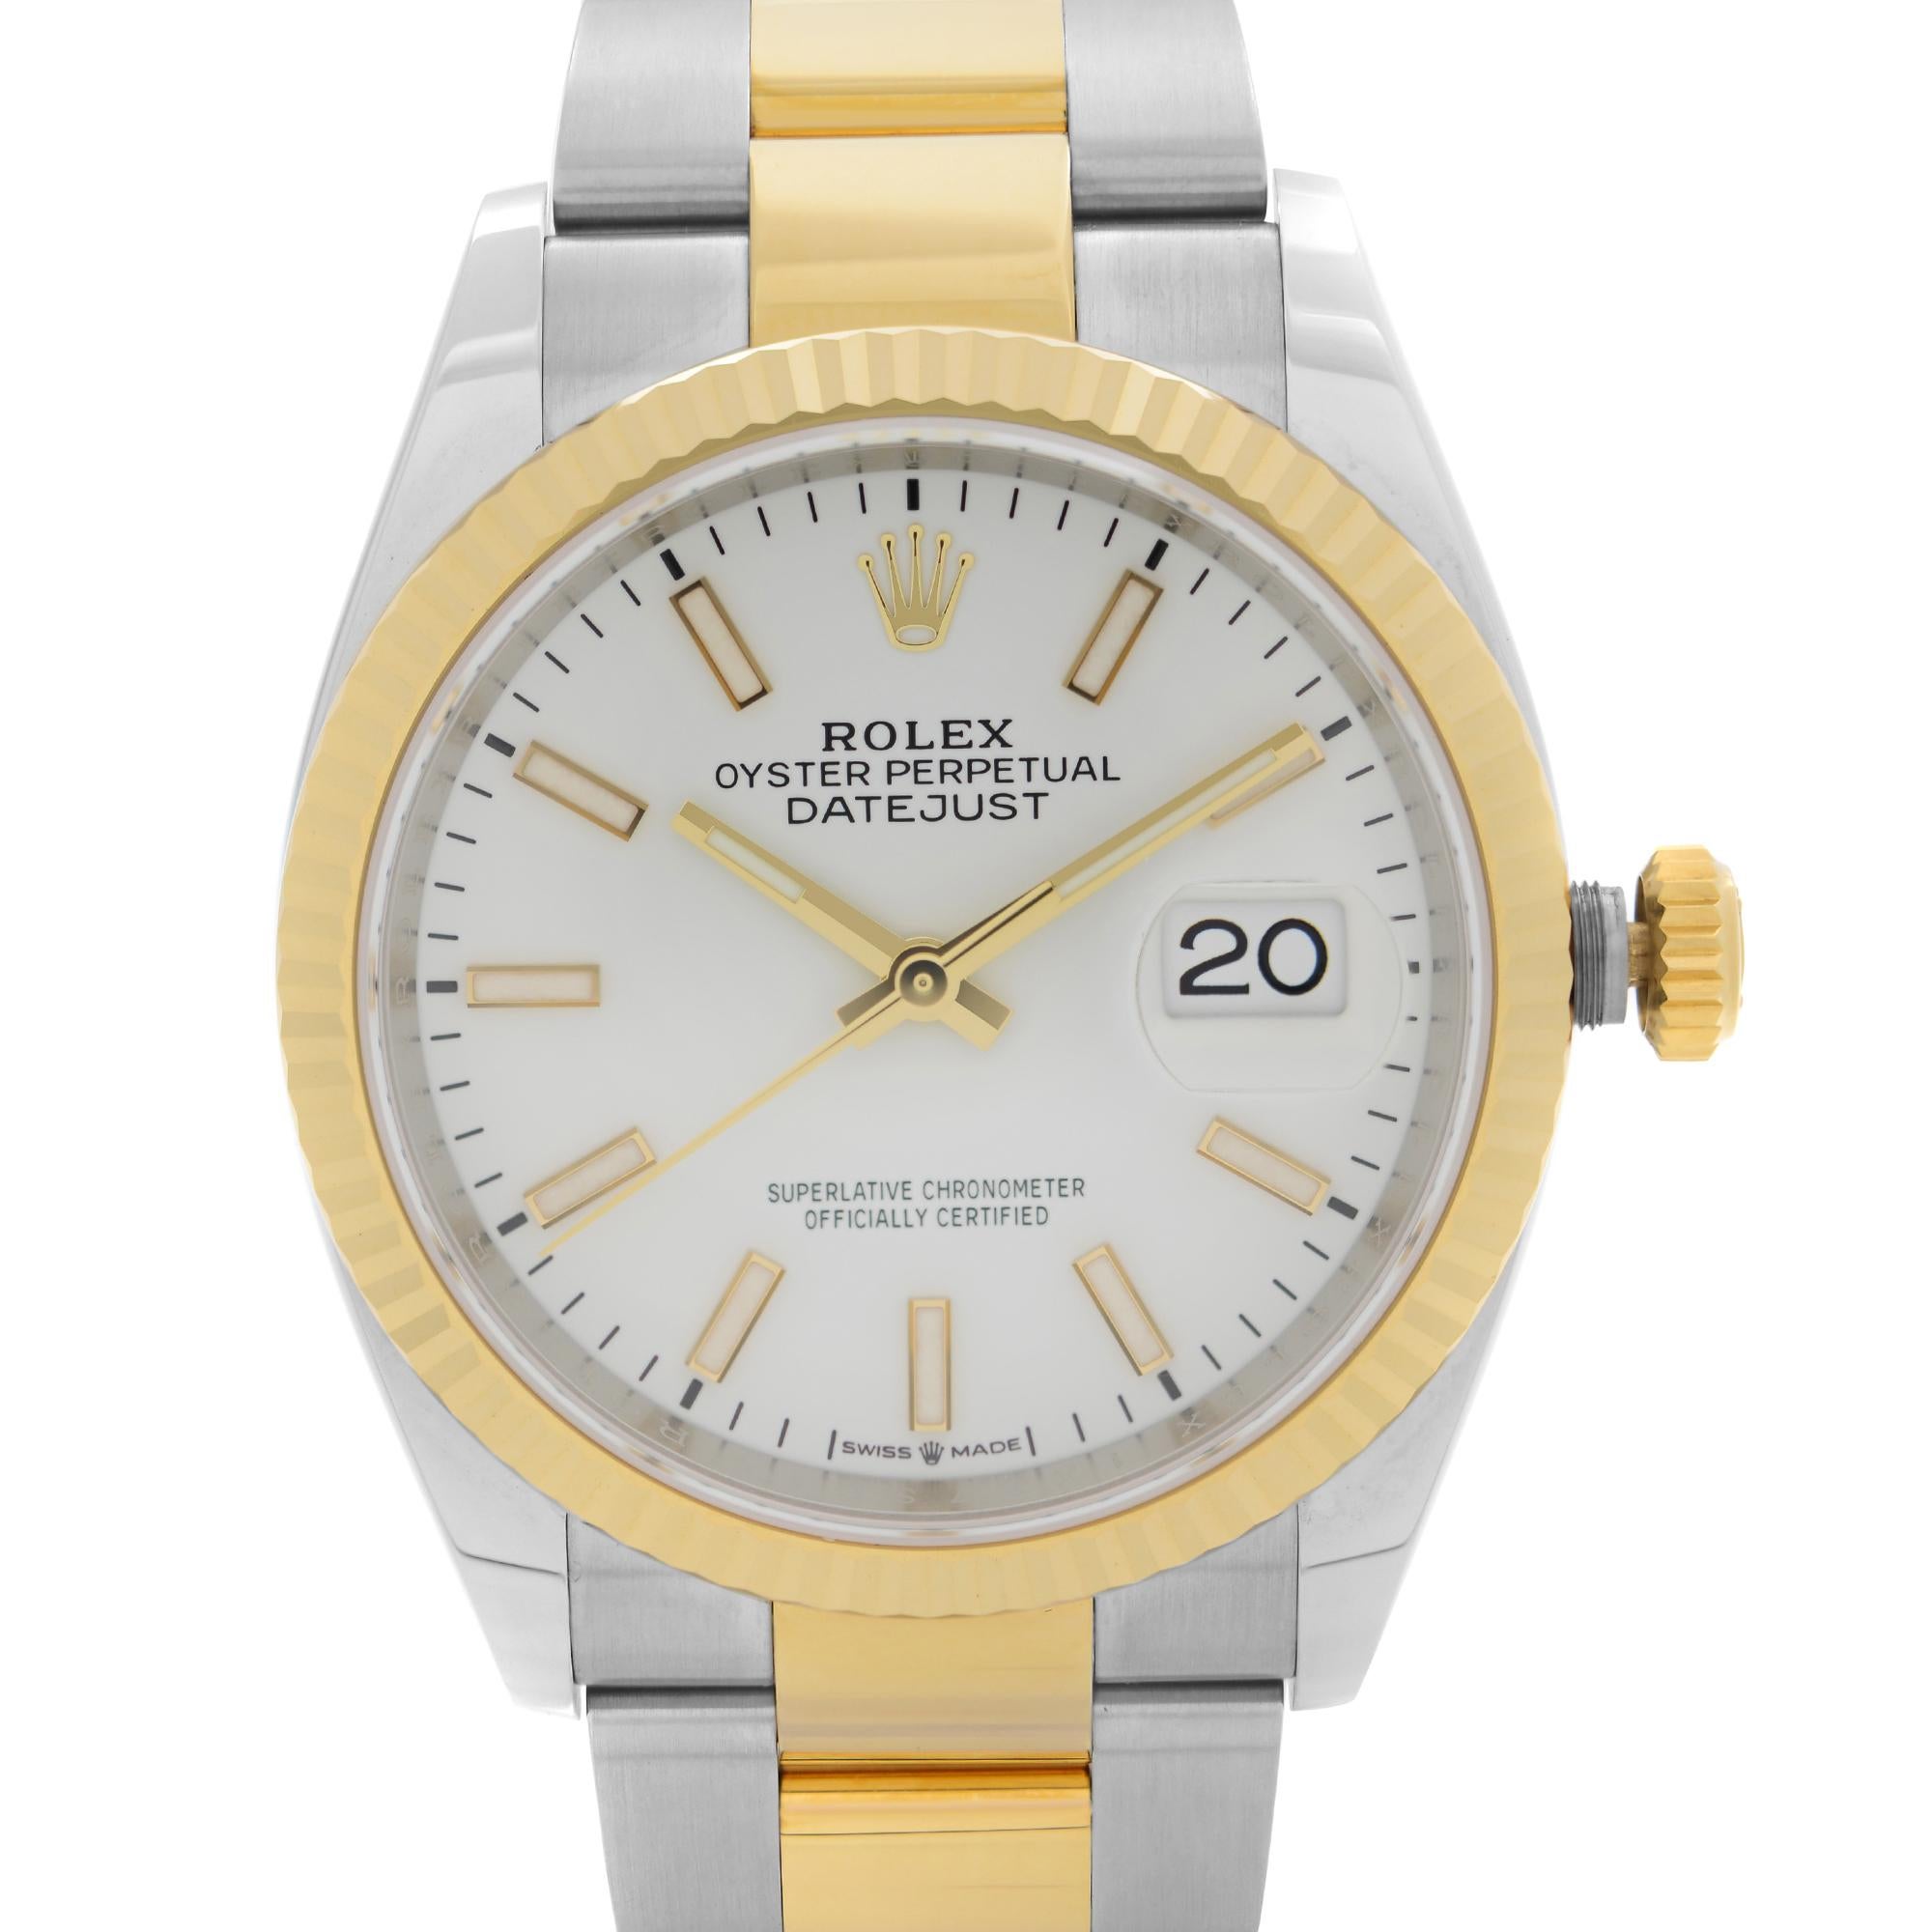 Display Model 2021 Card. Rolex Datejust 36mm 18k Yellow Gold White Dial Stainless Steel Men's Watch 126233. This Beautiful Timepiece Comes with a 2021 Card & is Powered by Mechanical (Automatic) Movement And Features: Round Stainless Steel Case with